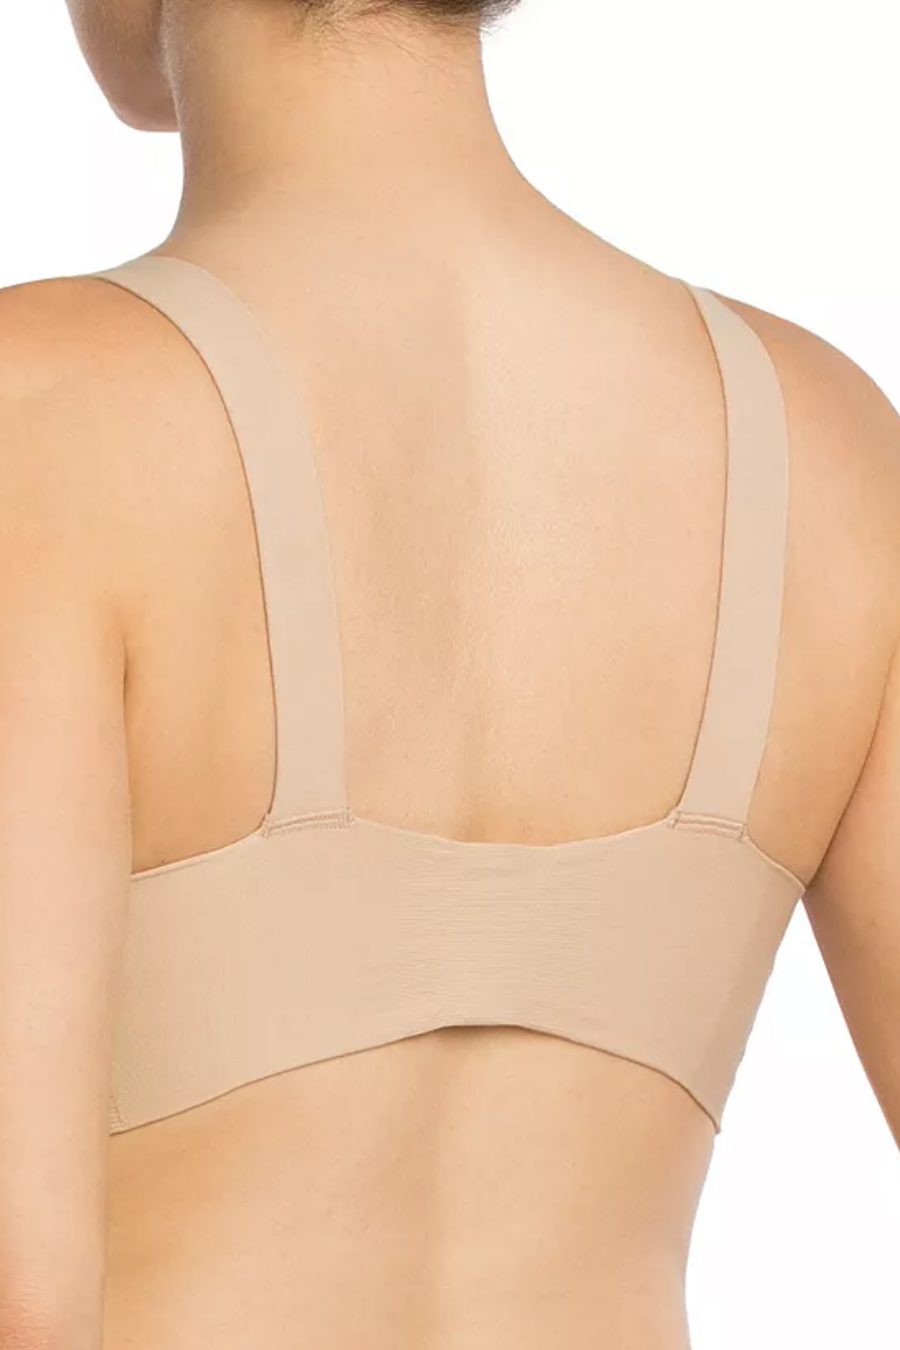 New! Spanx Bra-llelujah Unlined Full Coverage Bra Nude Baked Size 38B